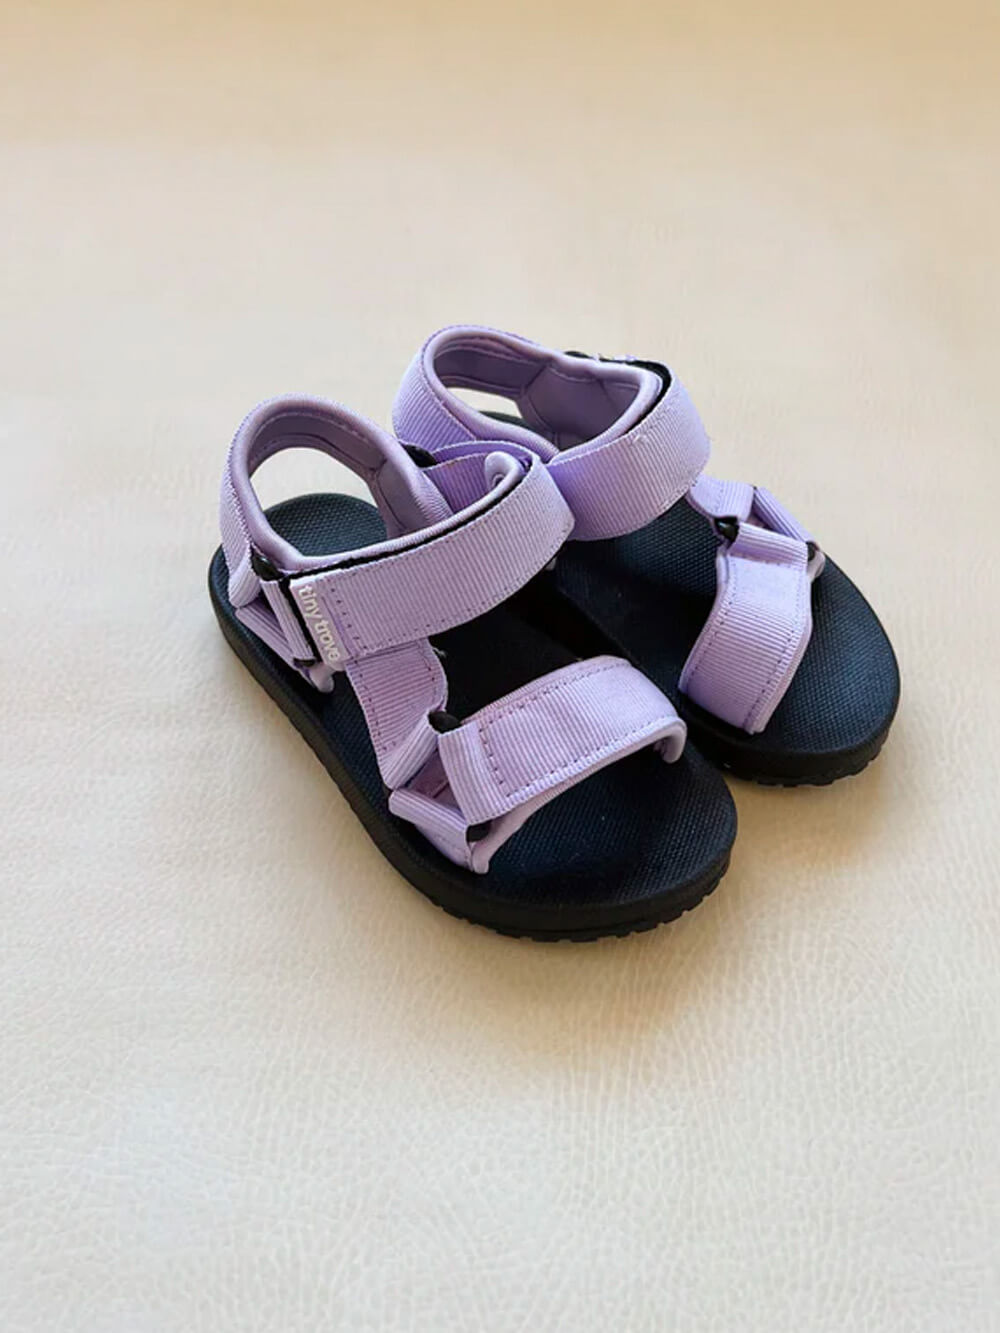 Olympia Velcro Sandals - Lilac